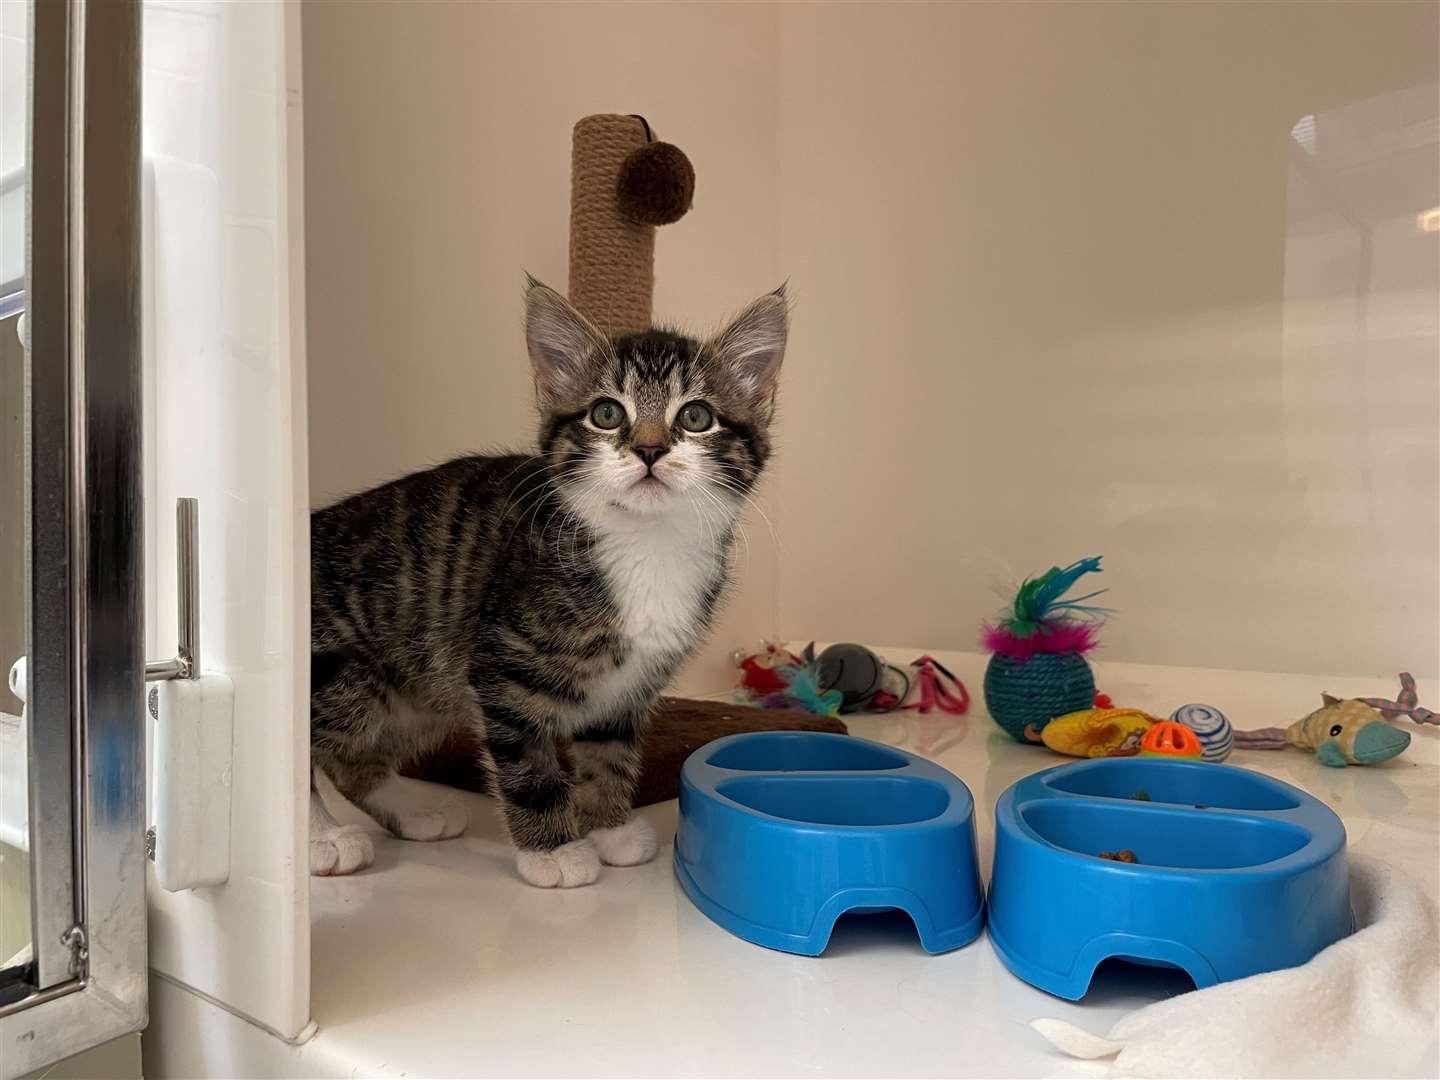 Your food donations will help Tasmin and the other kittens being cared for at the Scottish SPCA's Aberdeenshire centre. Picture: Scottish SPCA